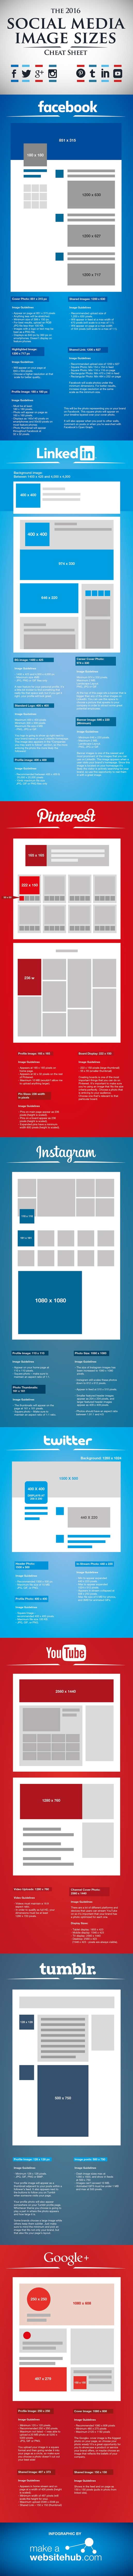 The 2016 Social Media Image Sizes Cheat Sheet infographic